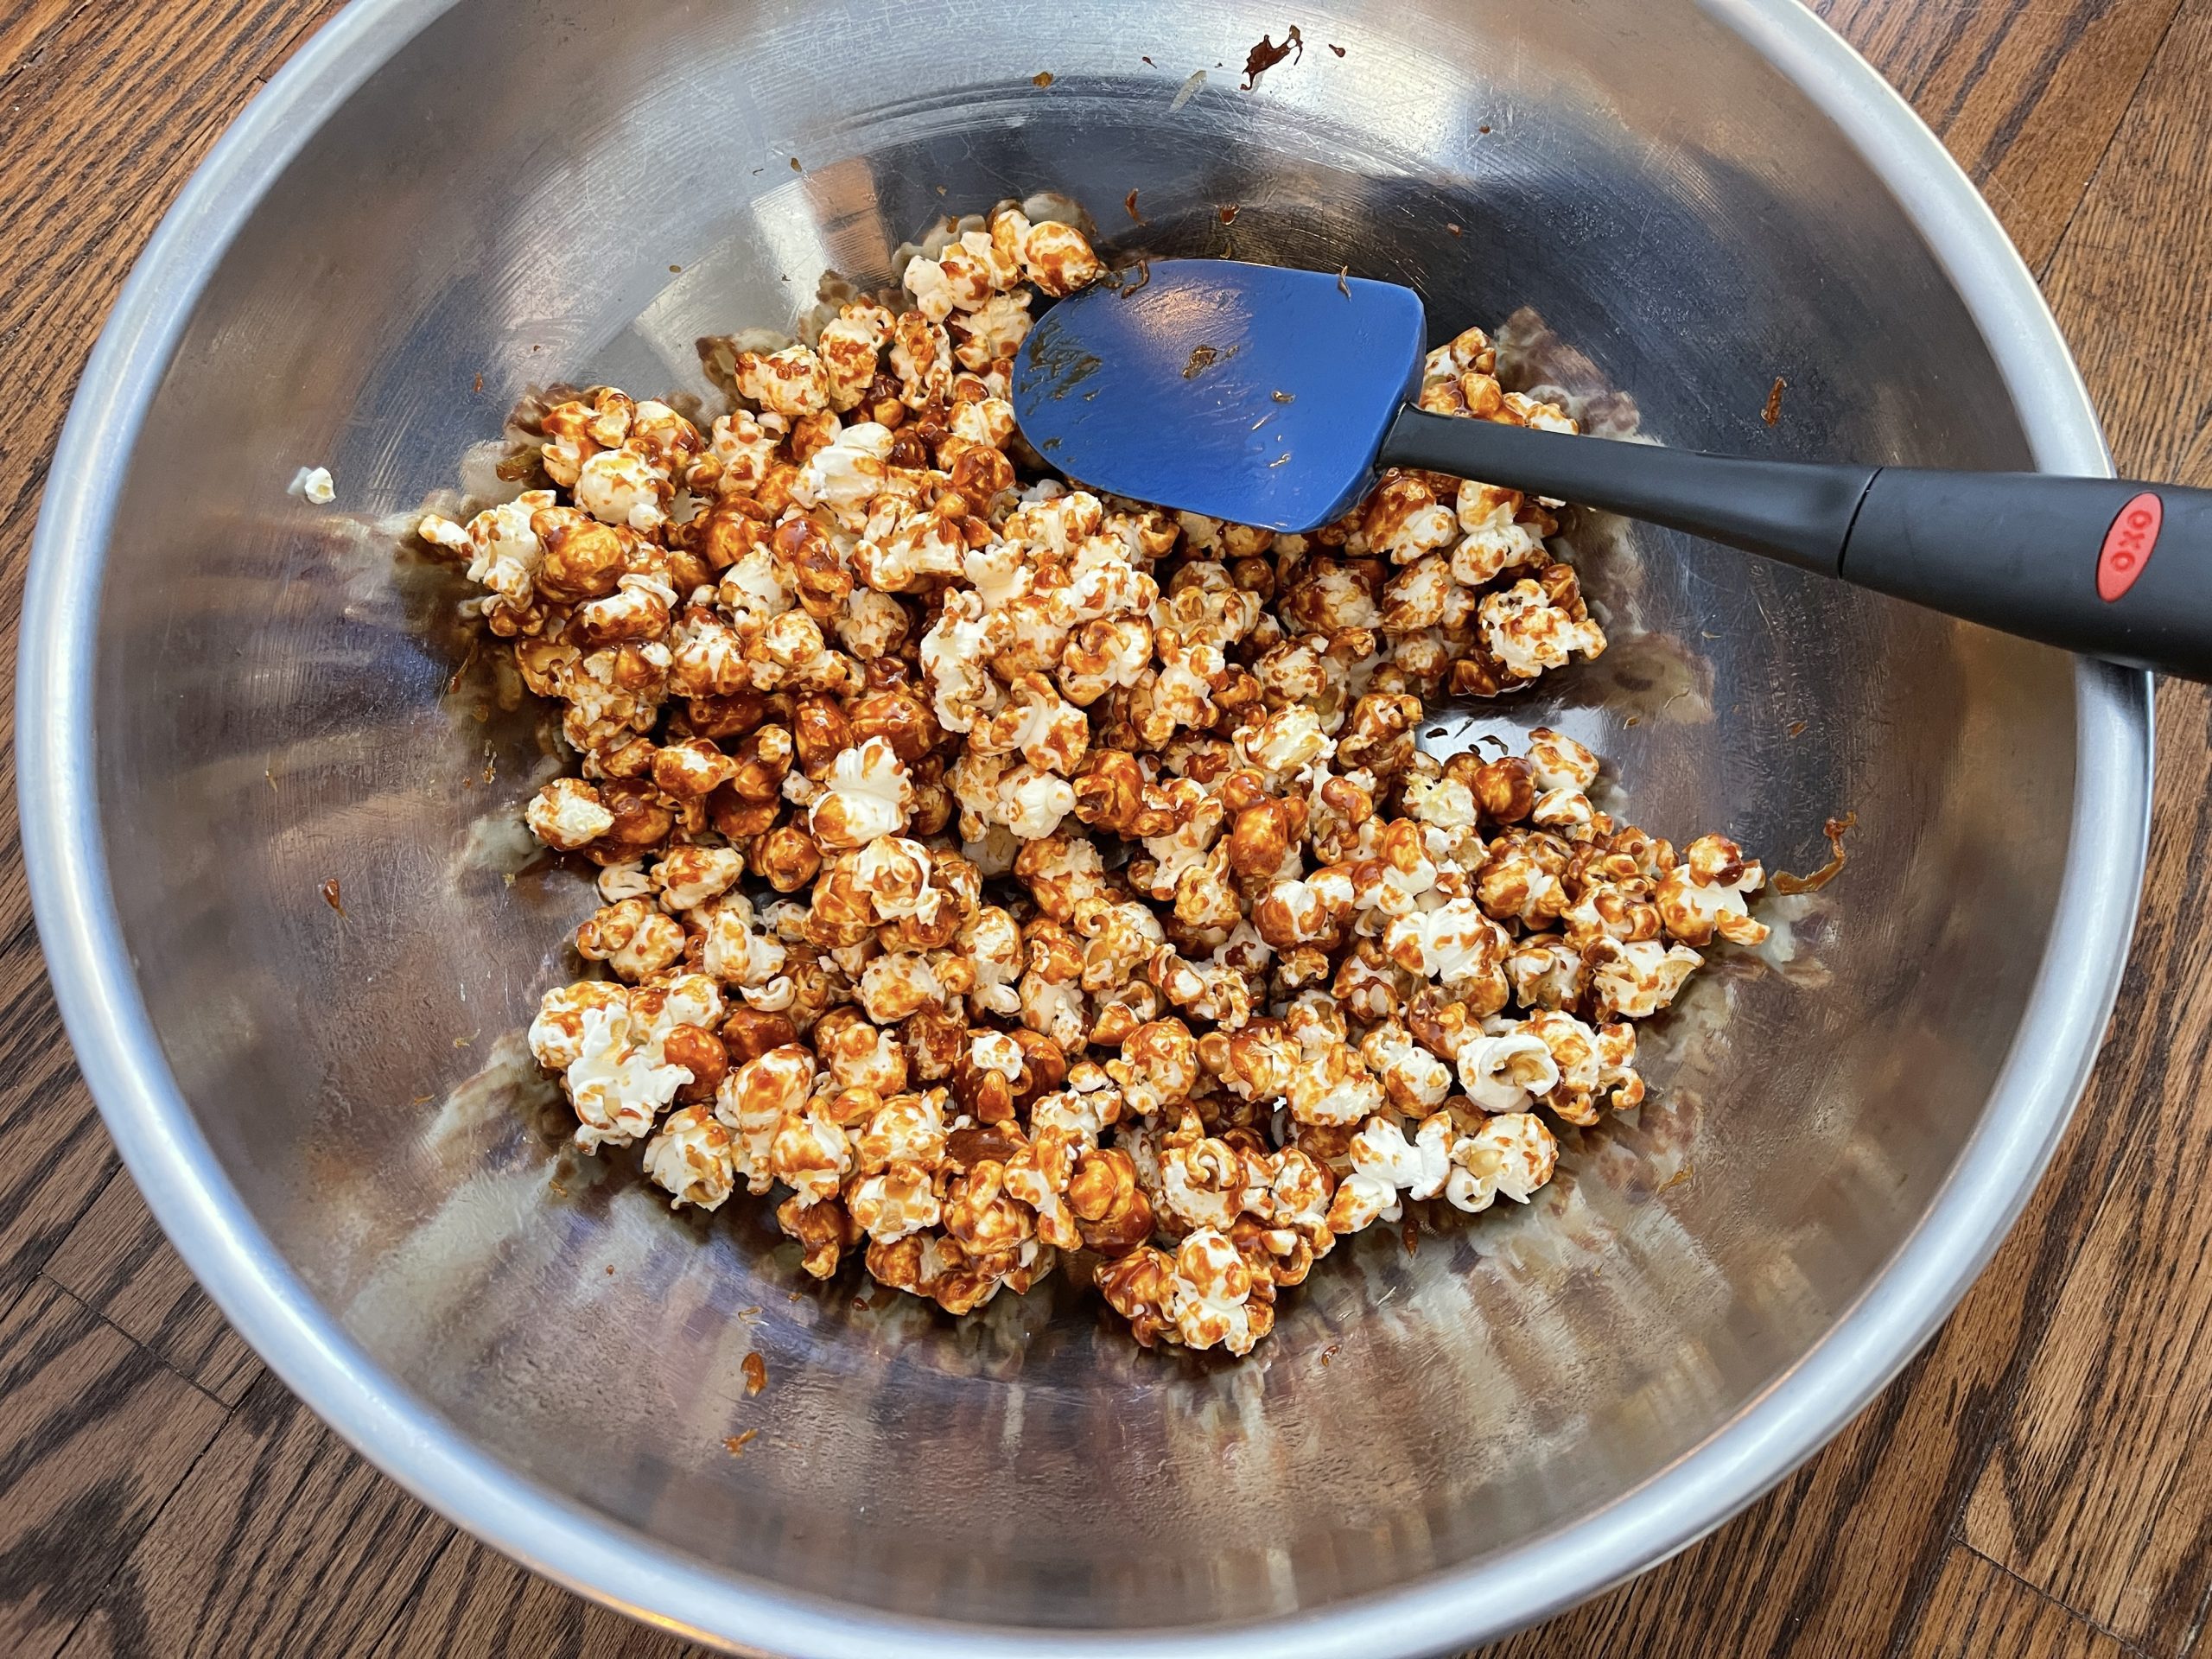 Mix popcorn and sauce until popcorn is coated